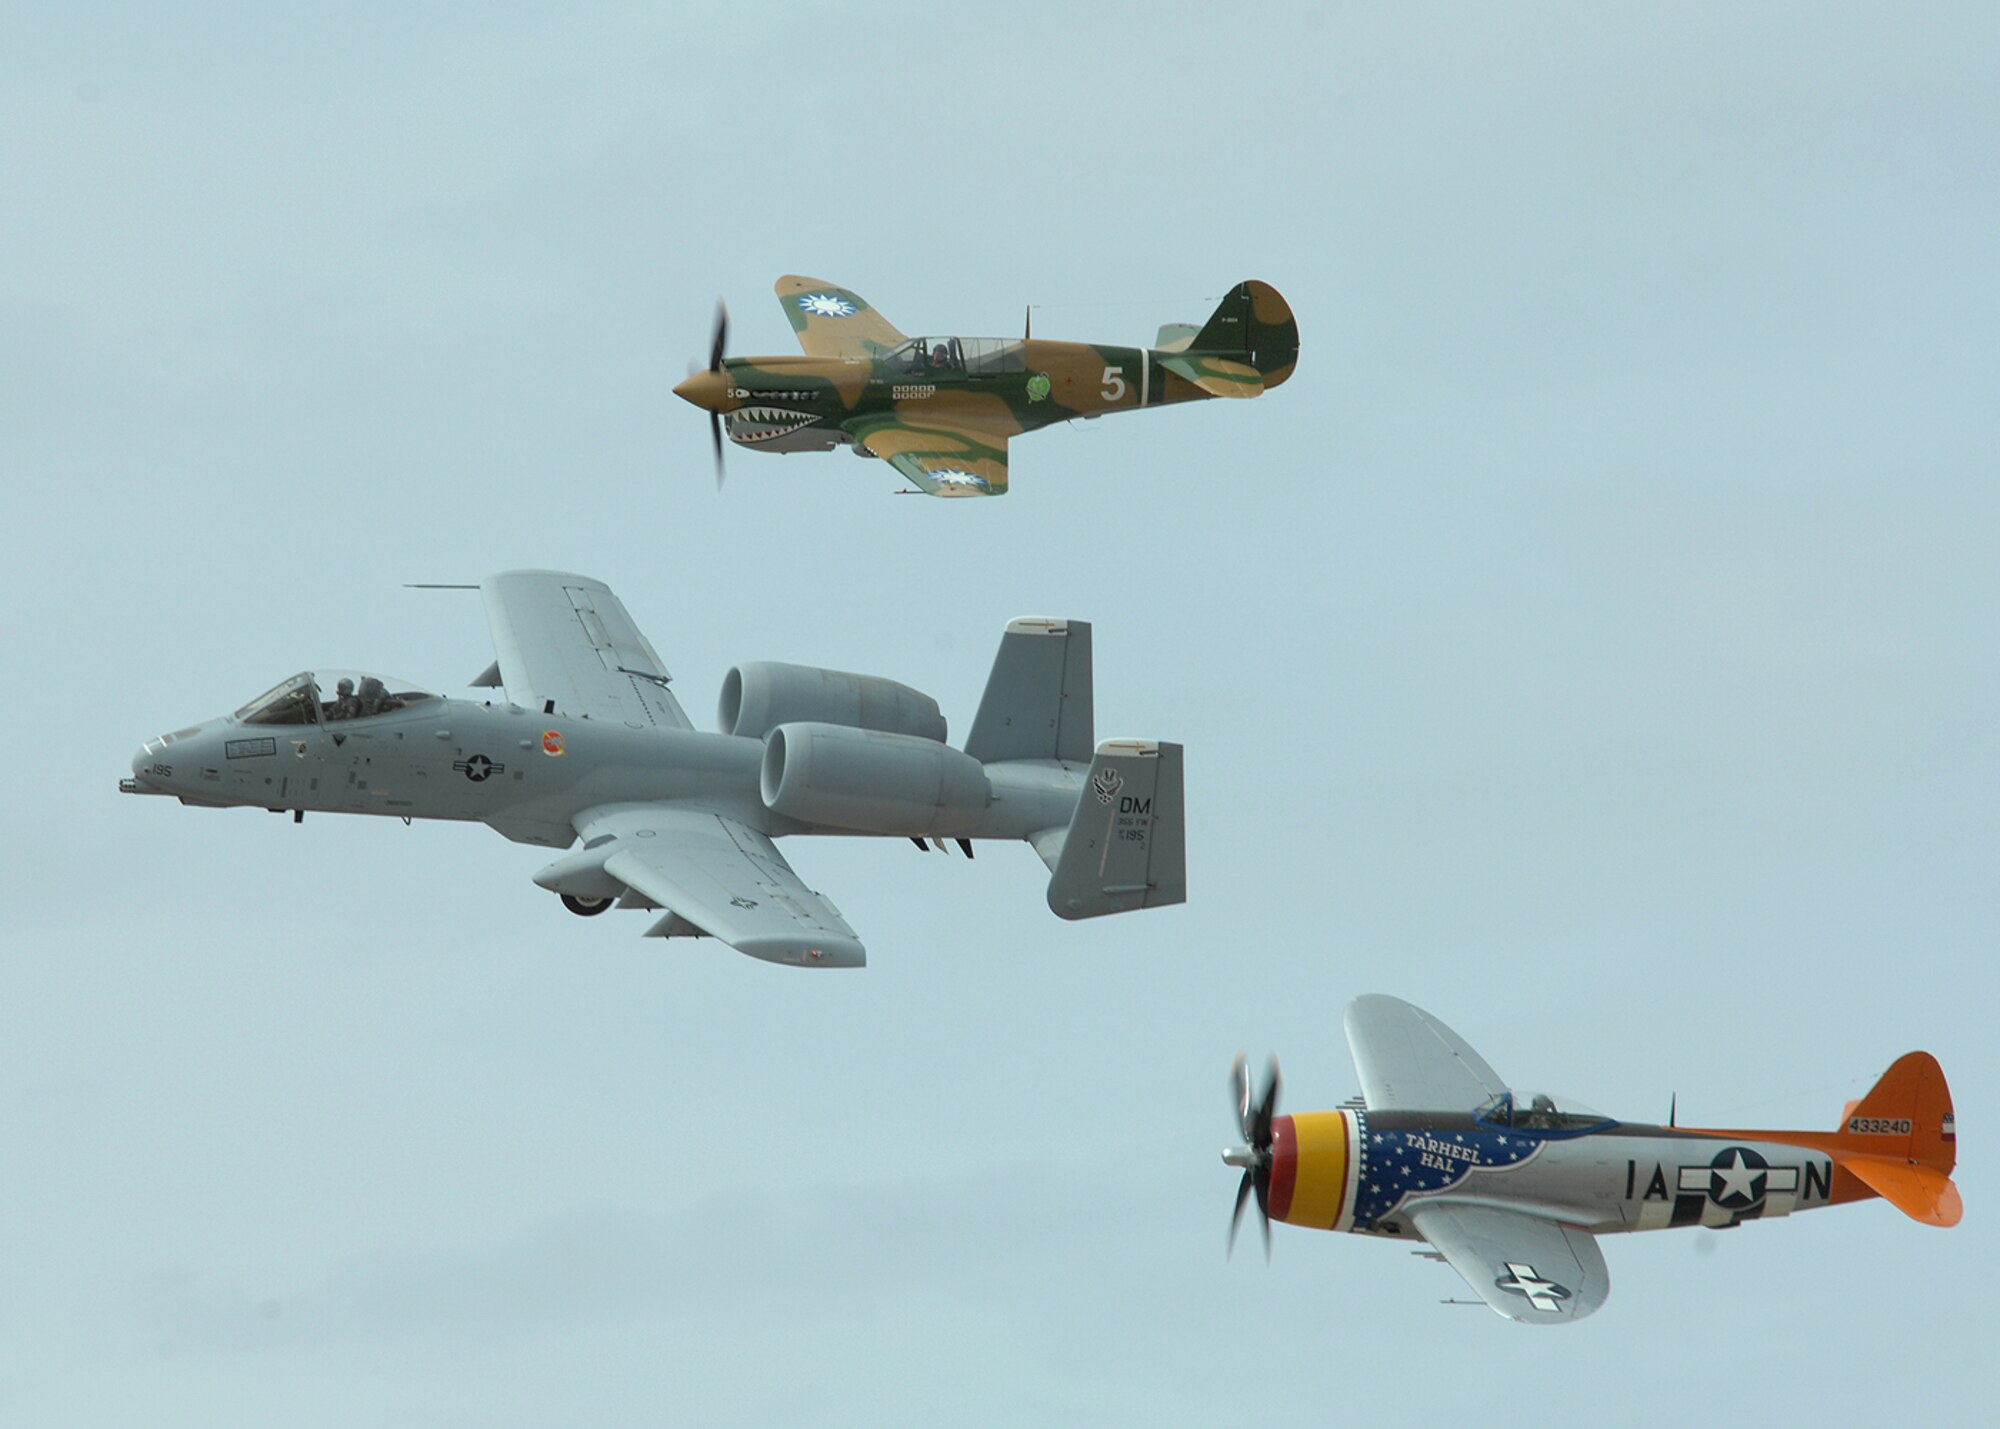 An A-10 Thunderbolt II from the A-10 West Coast Demonstration Team, a P-47, and a P-40 fly in formation during the 2008 Air Combat Command Heritage Flight Conference at Davis-Monthan AFB, Ariz, March 8. A P-51 Mustang, F-86 Sabre, and a F-15 from the West Coast demonstration team fly in formation during the 2008 Air Combat Command heritage Flight Conference, March 8 at Davis-Monthan AFB, Ariz. The Heritage Conference provides an opportunity for Air Combat Command demonstration pilots to train together with modern and historic military aircraft in preparation for the upcoming air show seasons. (U.S. Air Force photo by Senior Airman Christina D. Kinsey)